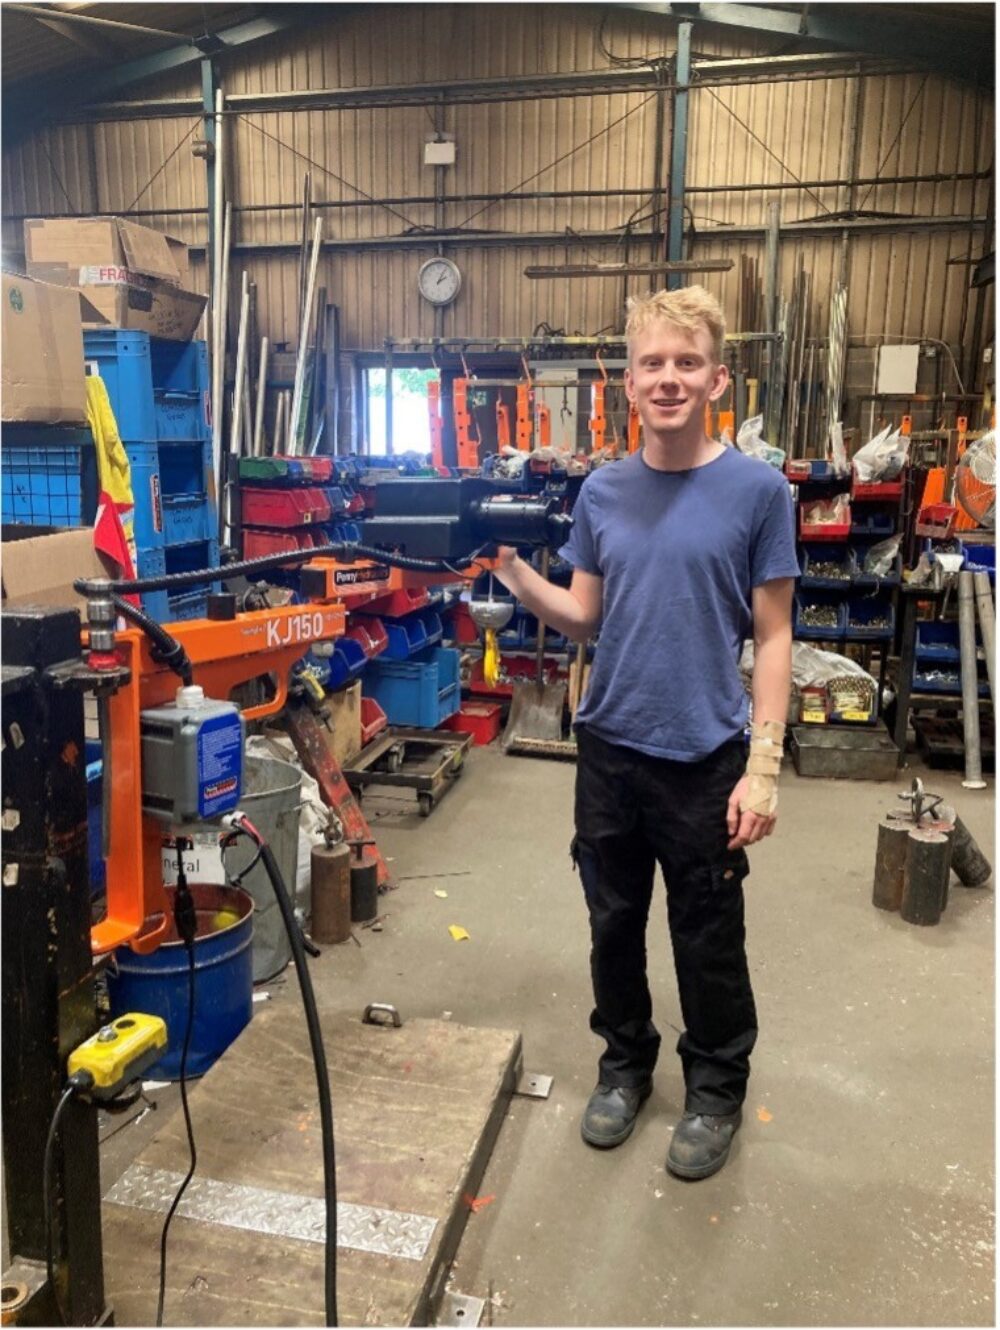 Penny Hydraulics helped me take the first step into my engineering career – Penny Hydraulics Ltd